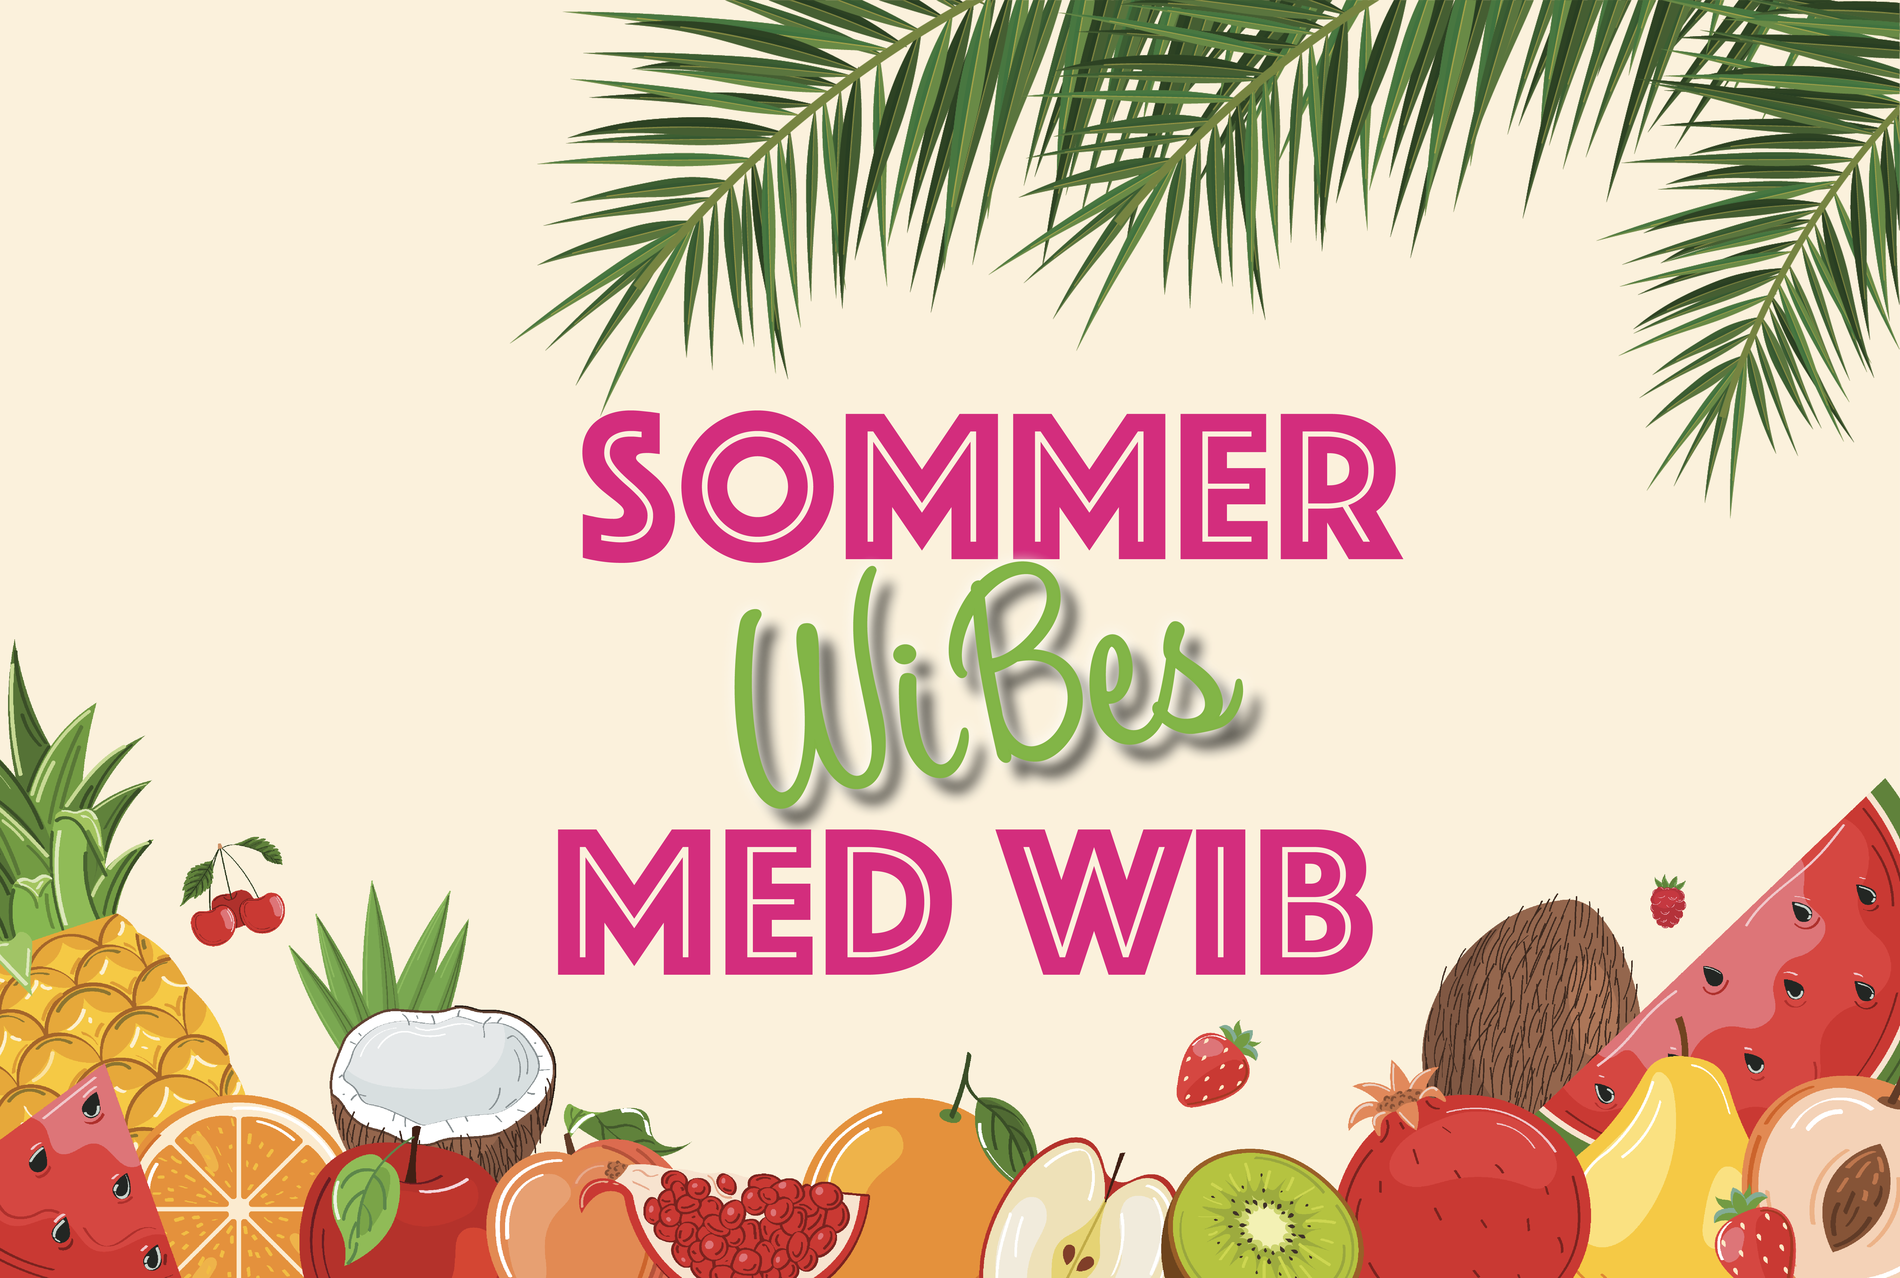 SommerWibes med WIB